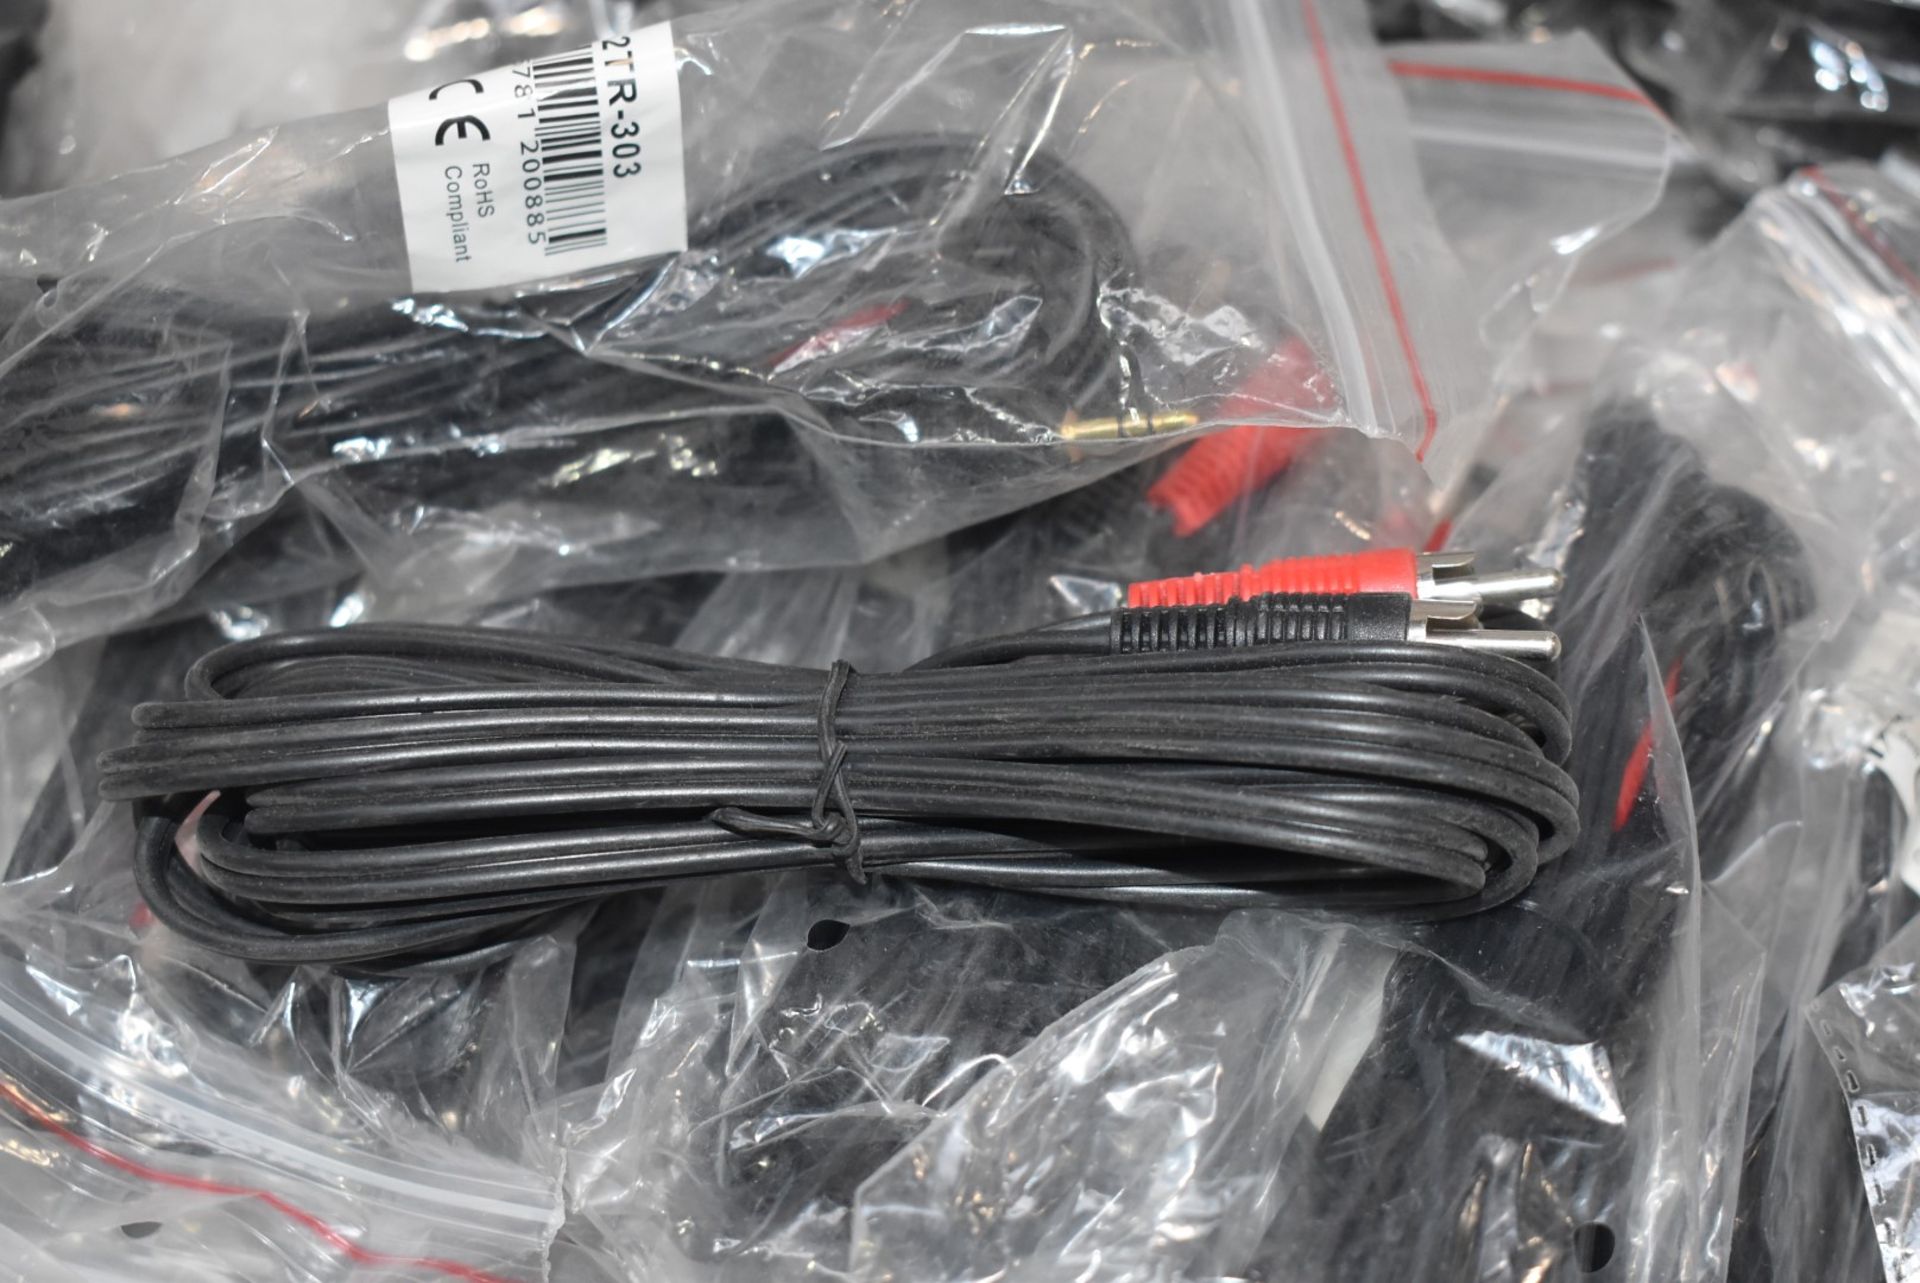 90 x Assorted Cables Including Various USB Connection Leads - New in Packets - Image 14 of 21